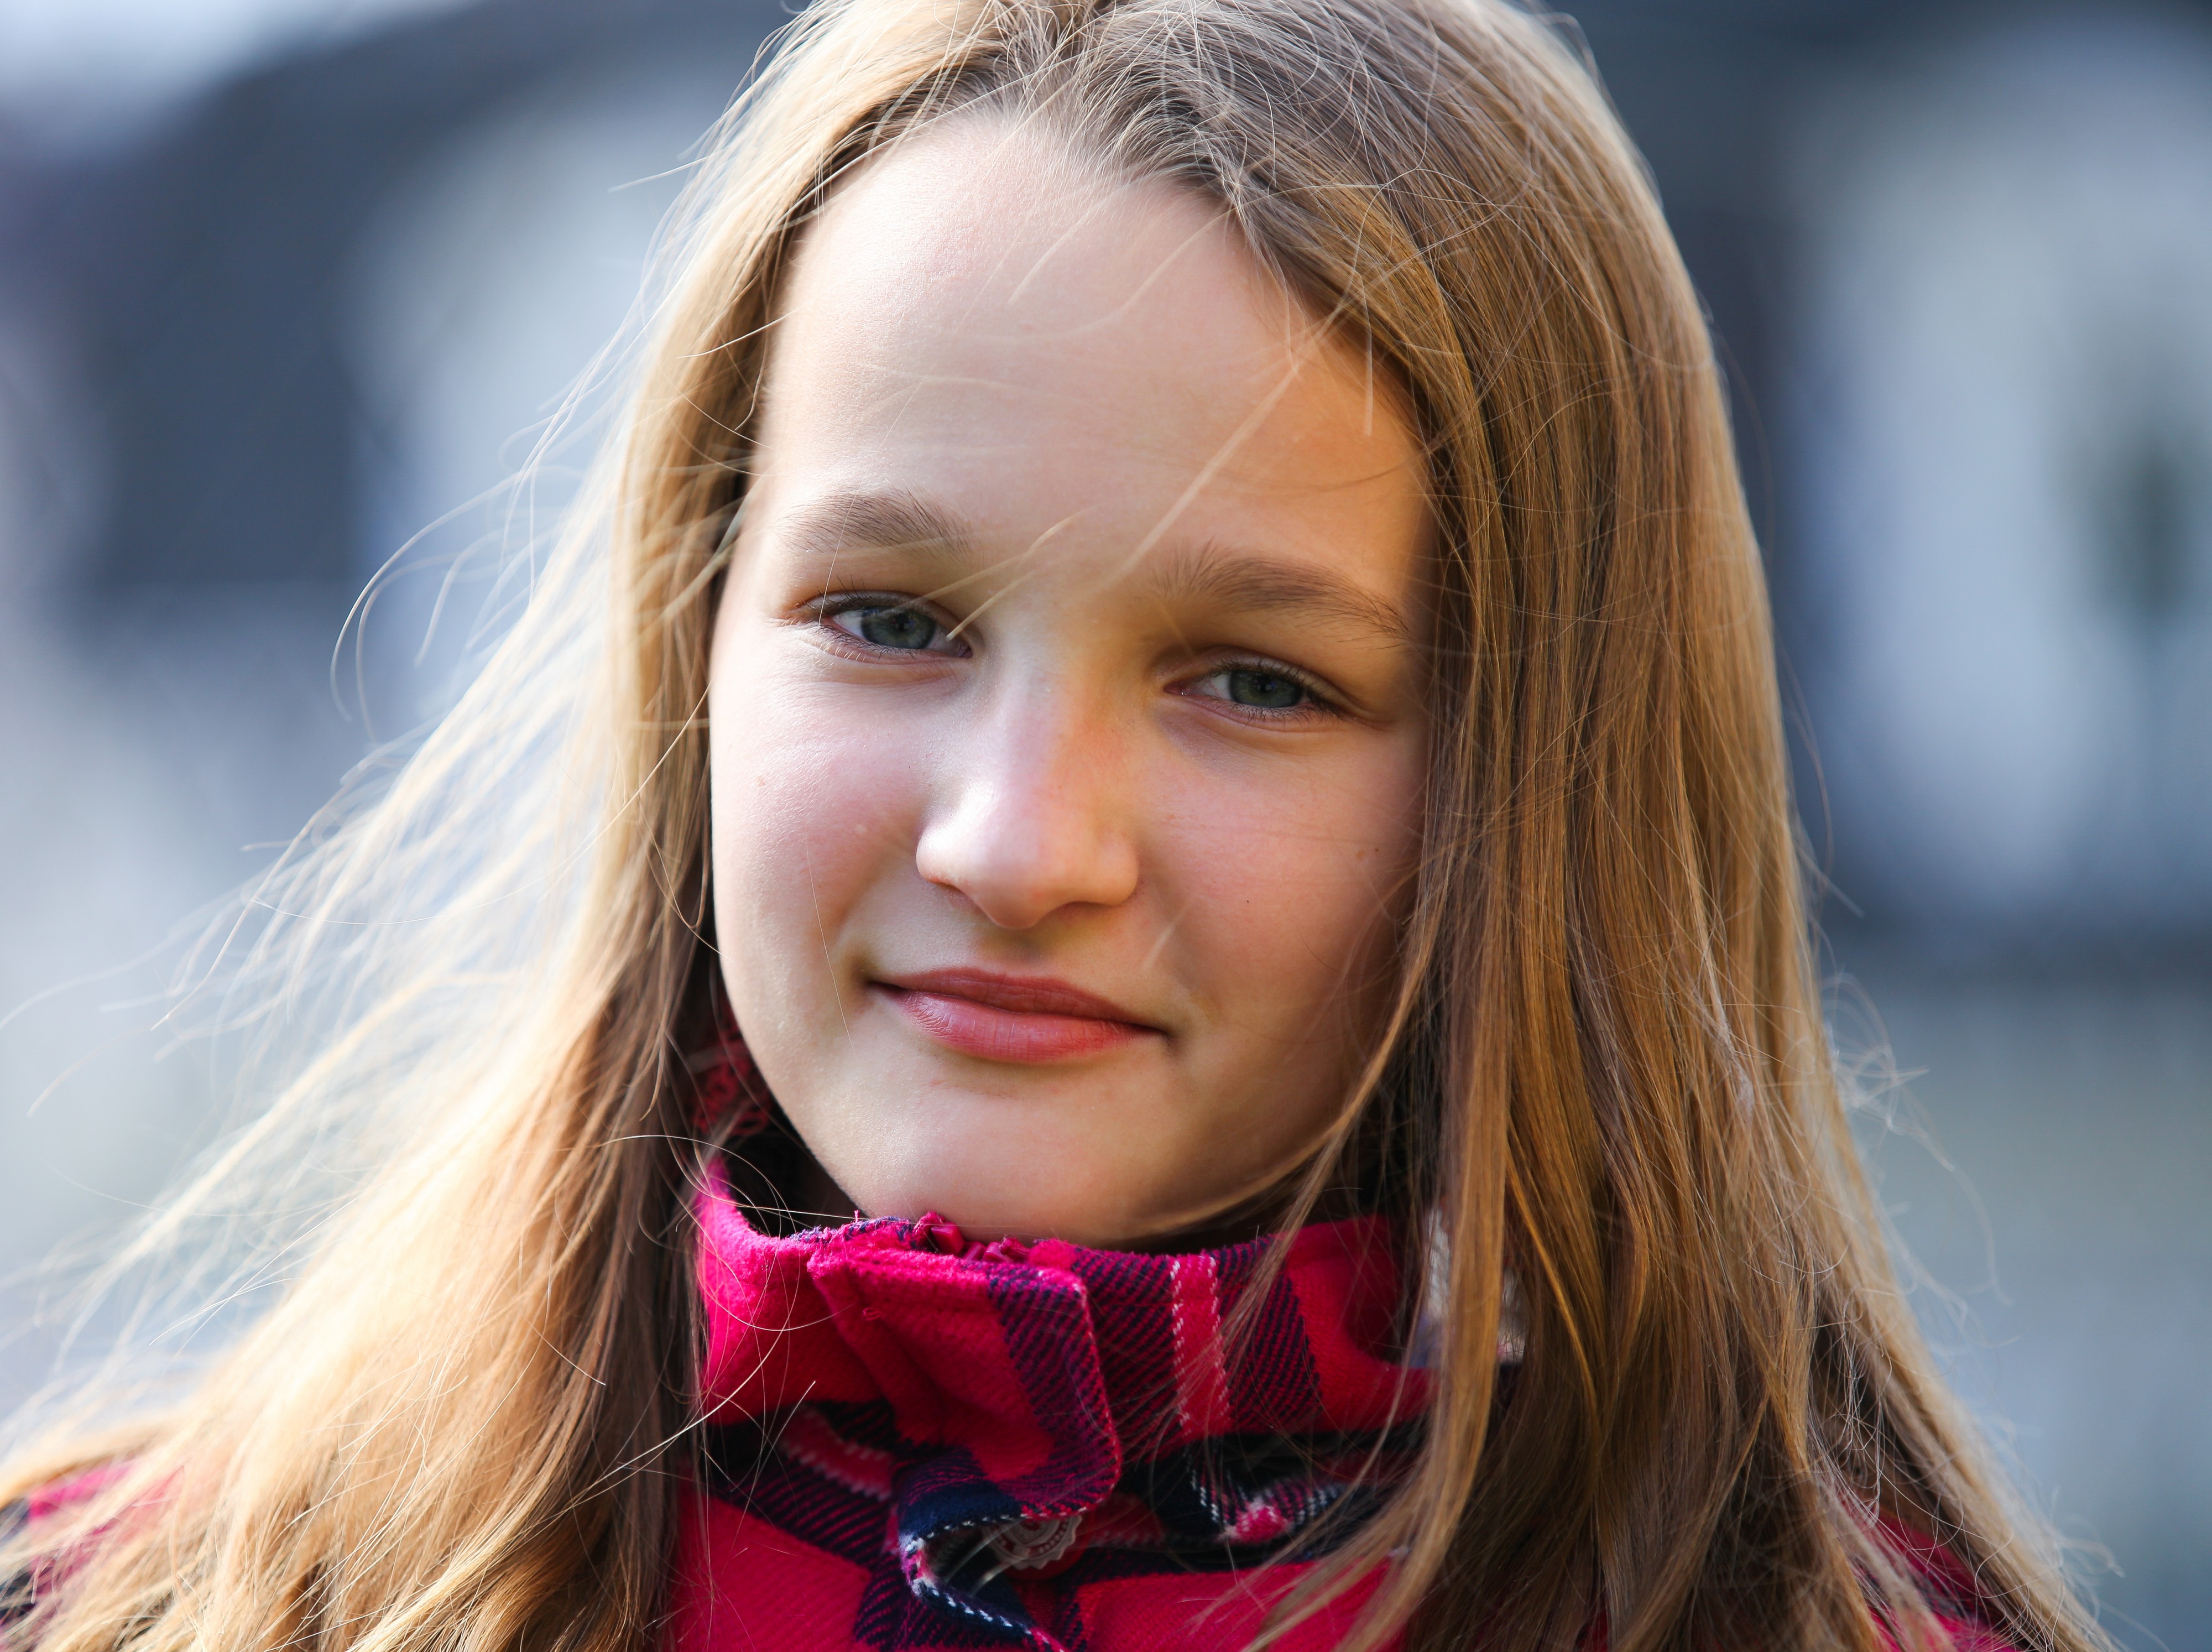 a headshot of an astonishingly beautiful young Catholic girl photographed in September 2013, picture 19/34